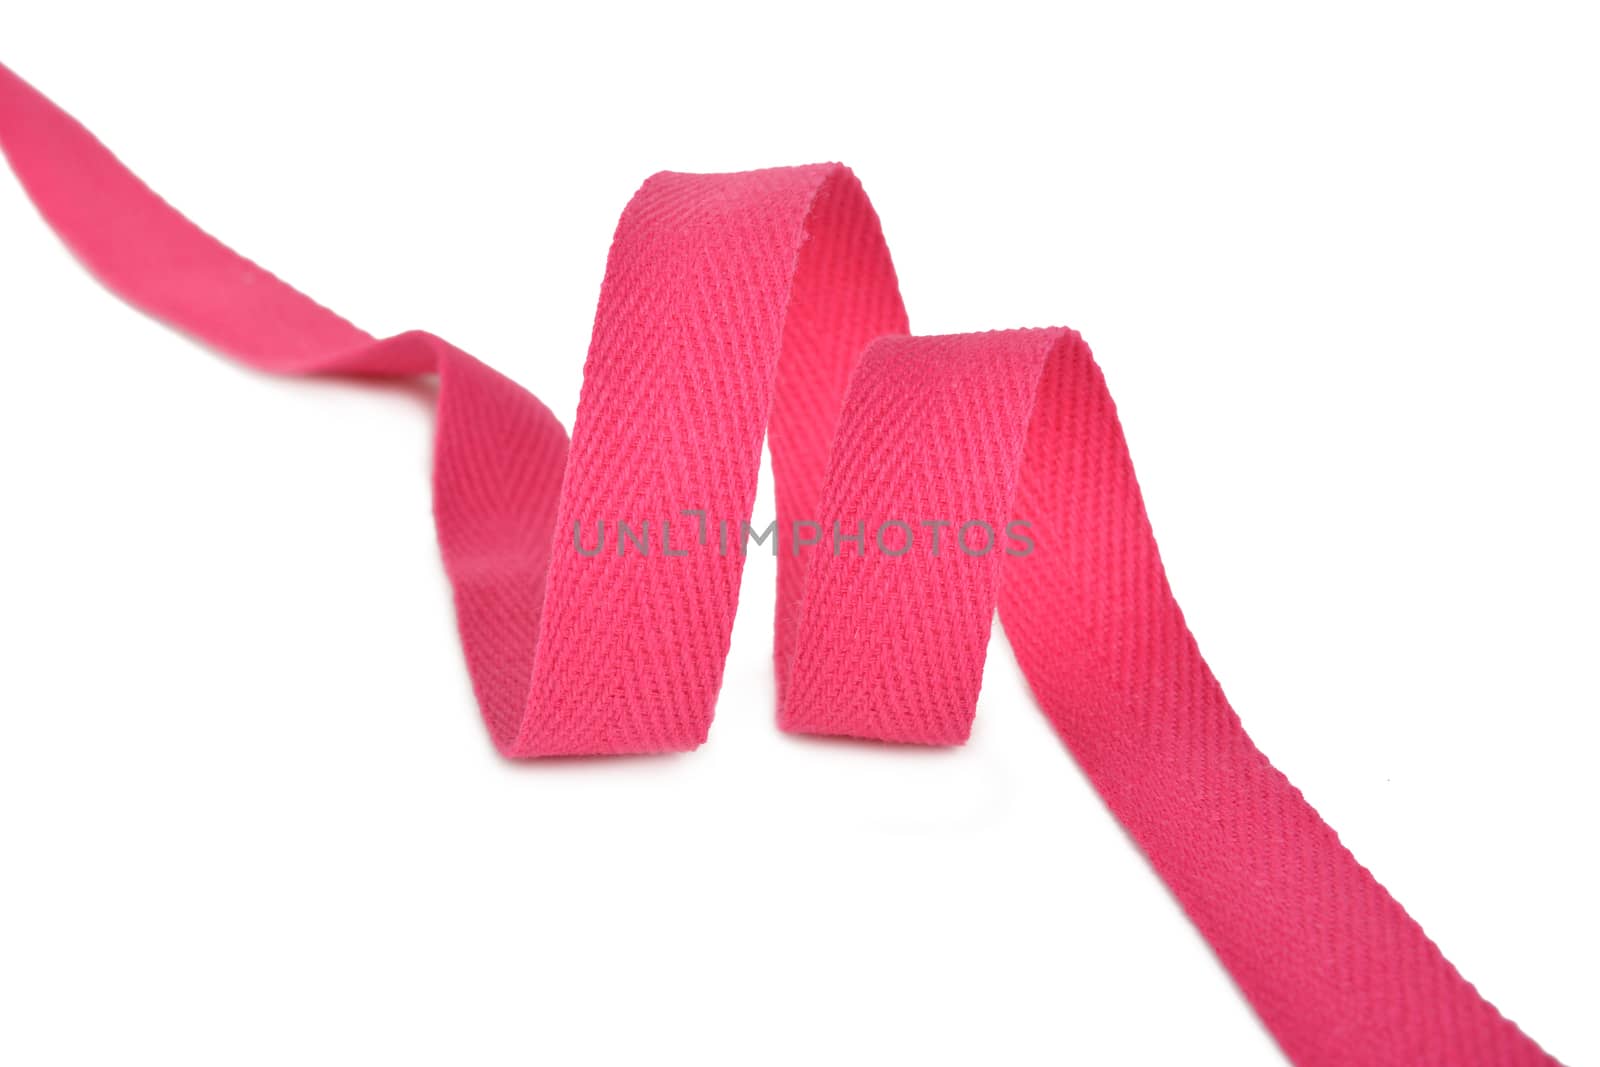 pink Twisted ribbon of cotton Keeper braid on white background. Tape For sewing clothes.